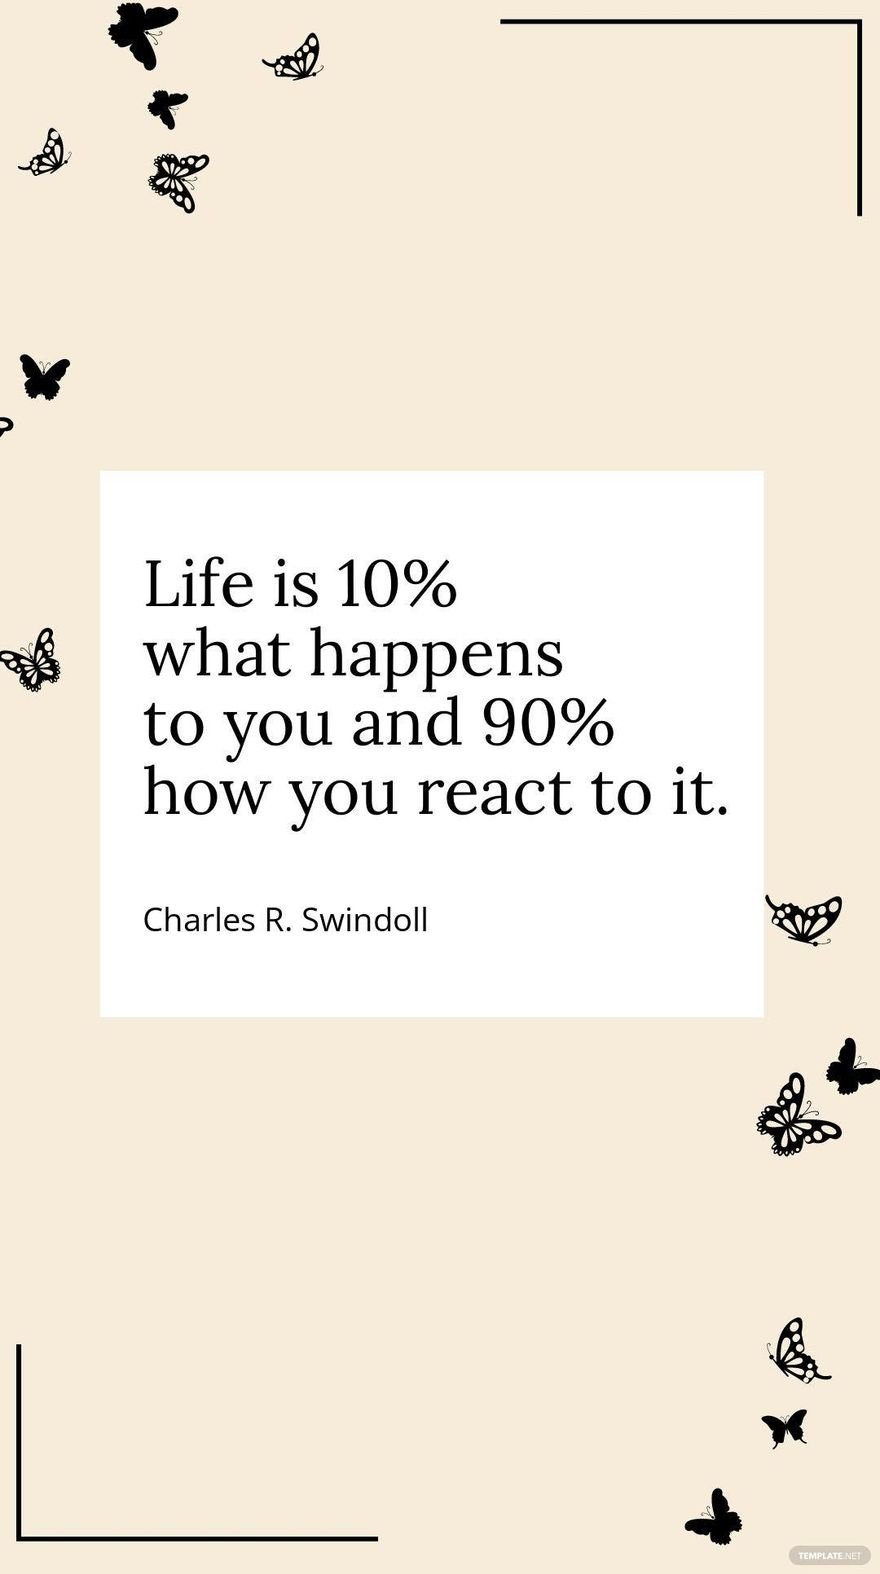 Charles R. Swindoll - Life is 10% what happens to you and 90% how you react to it.